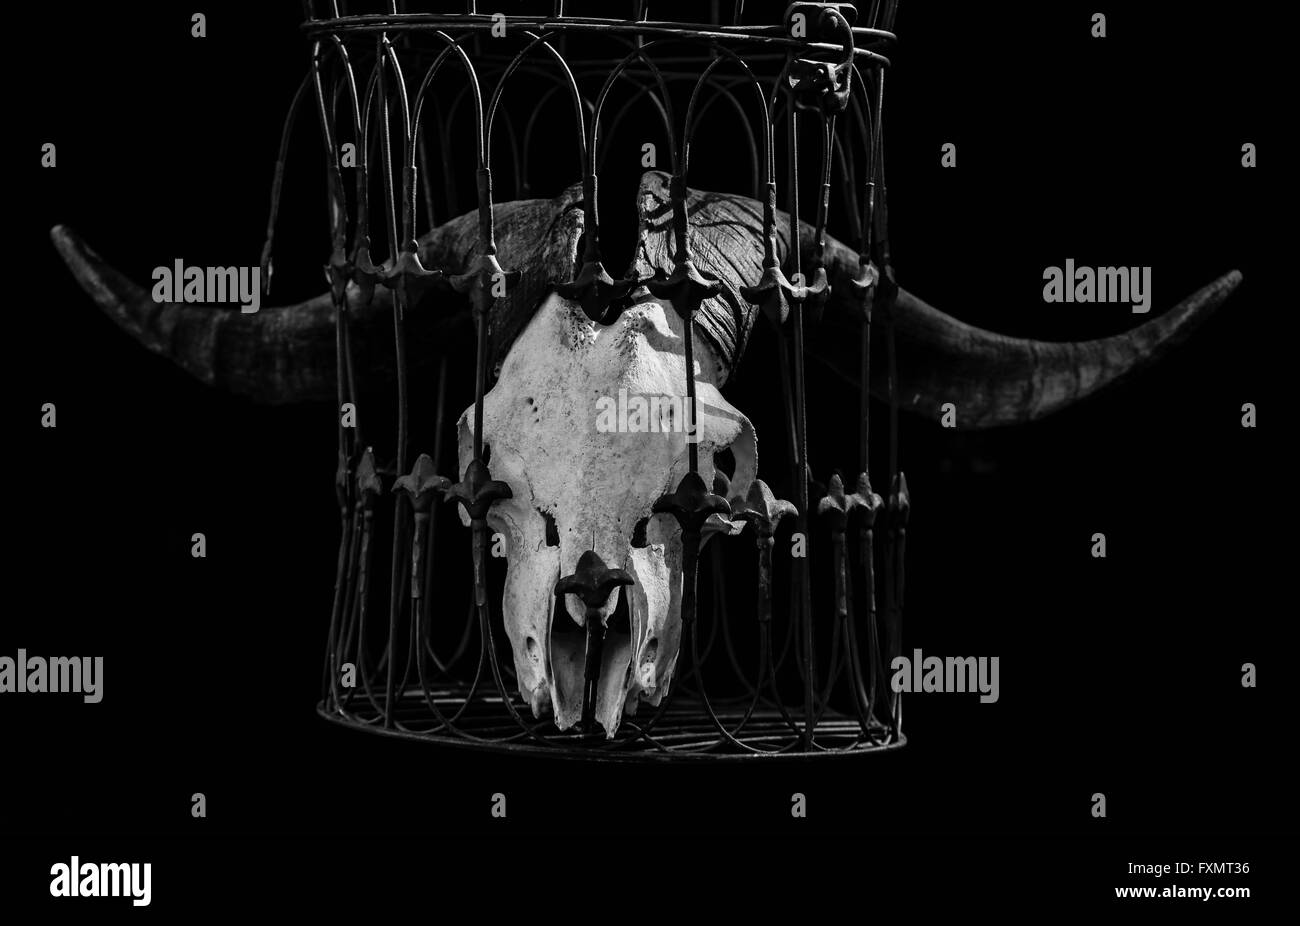 Animal skull with big horns in a cage with a black background in black and white Stock Photo